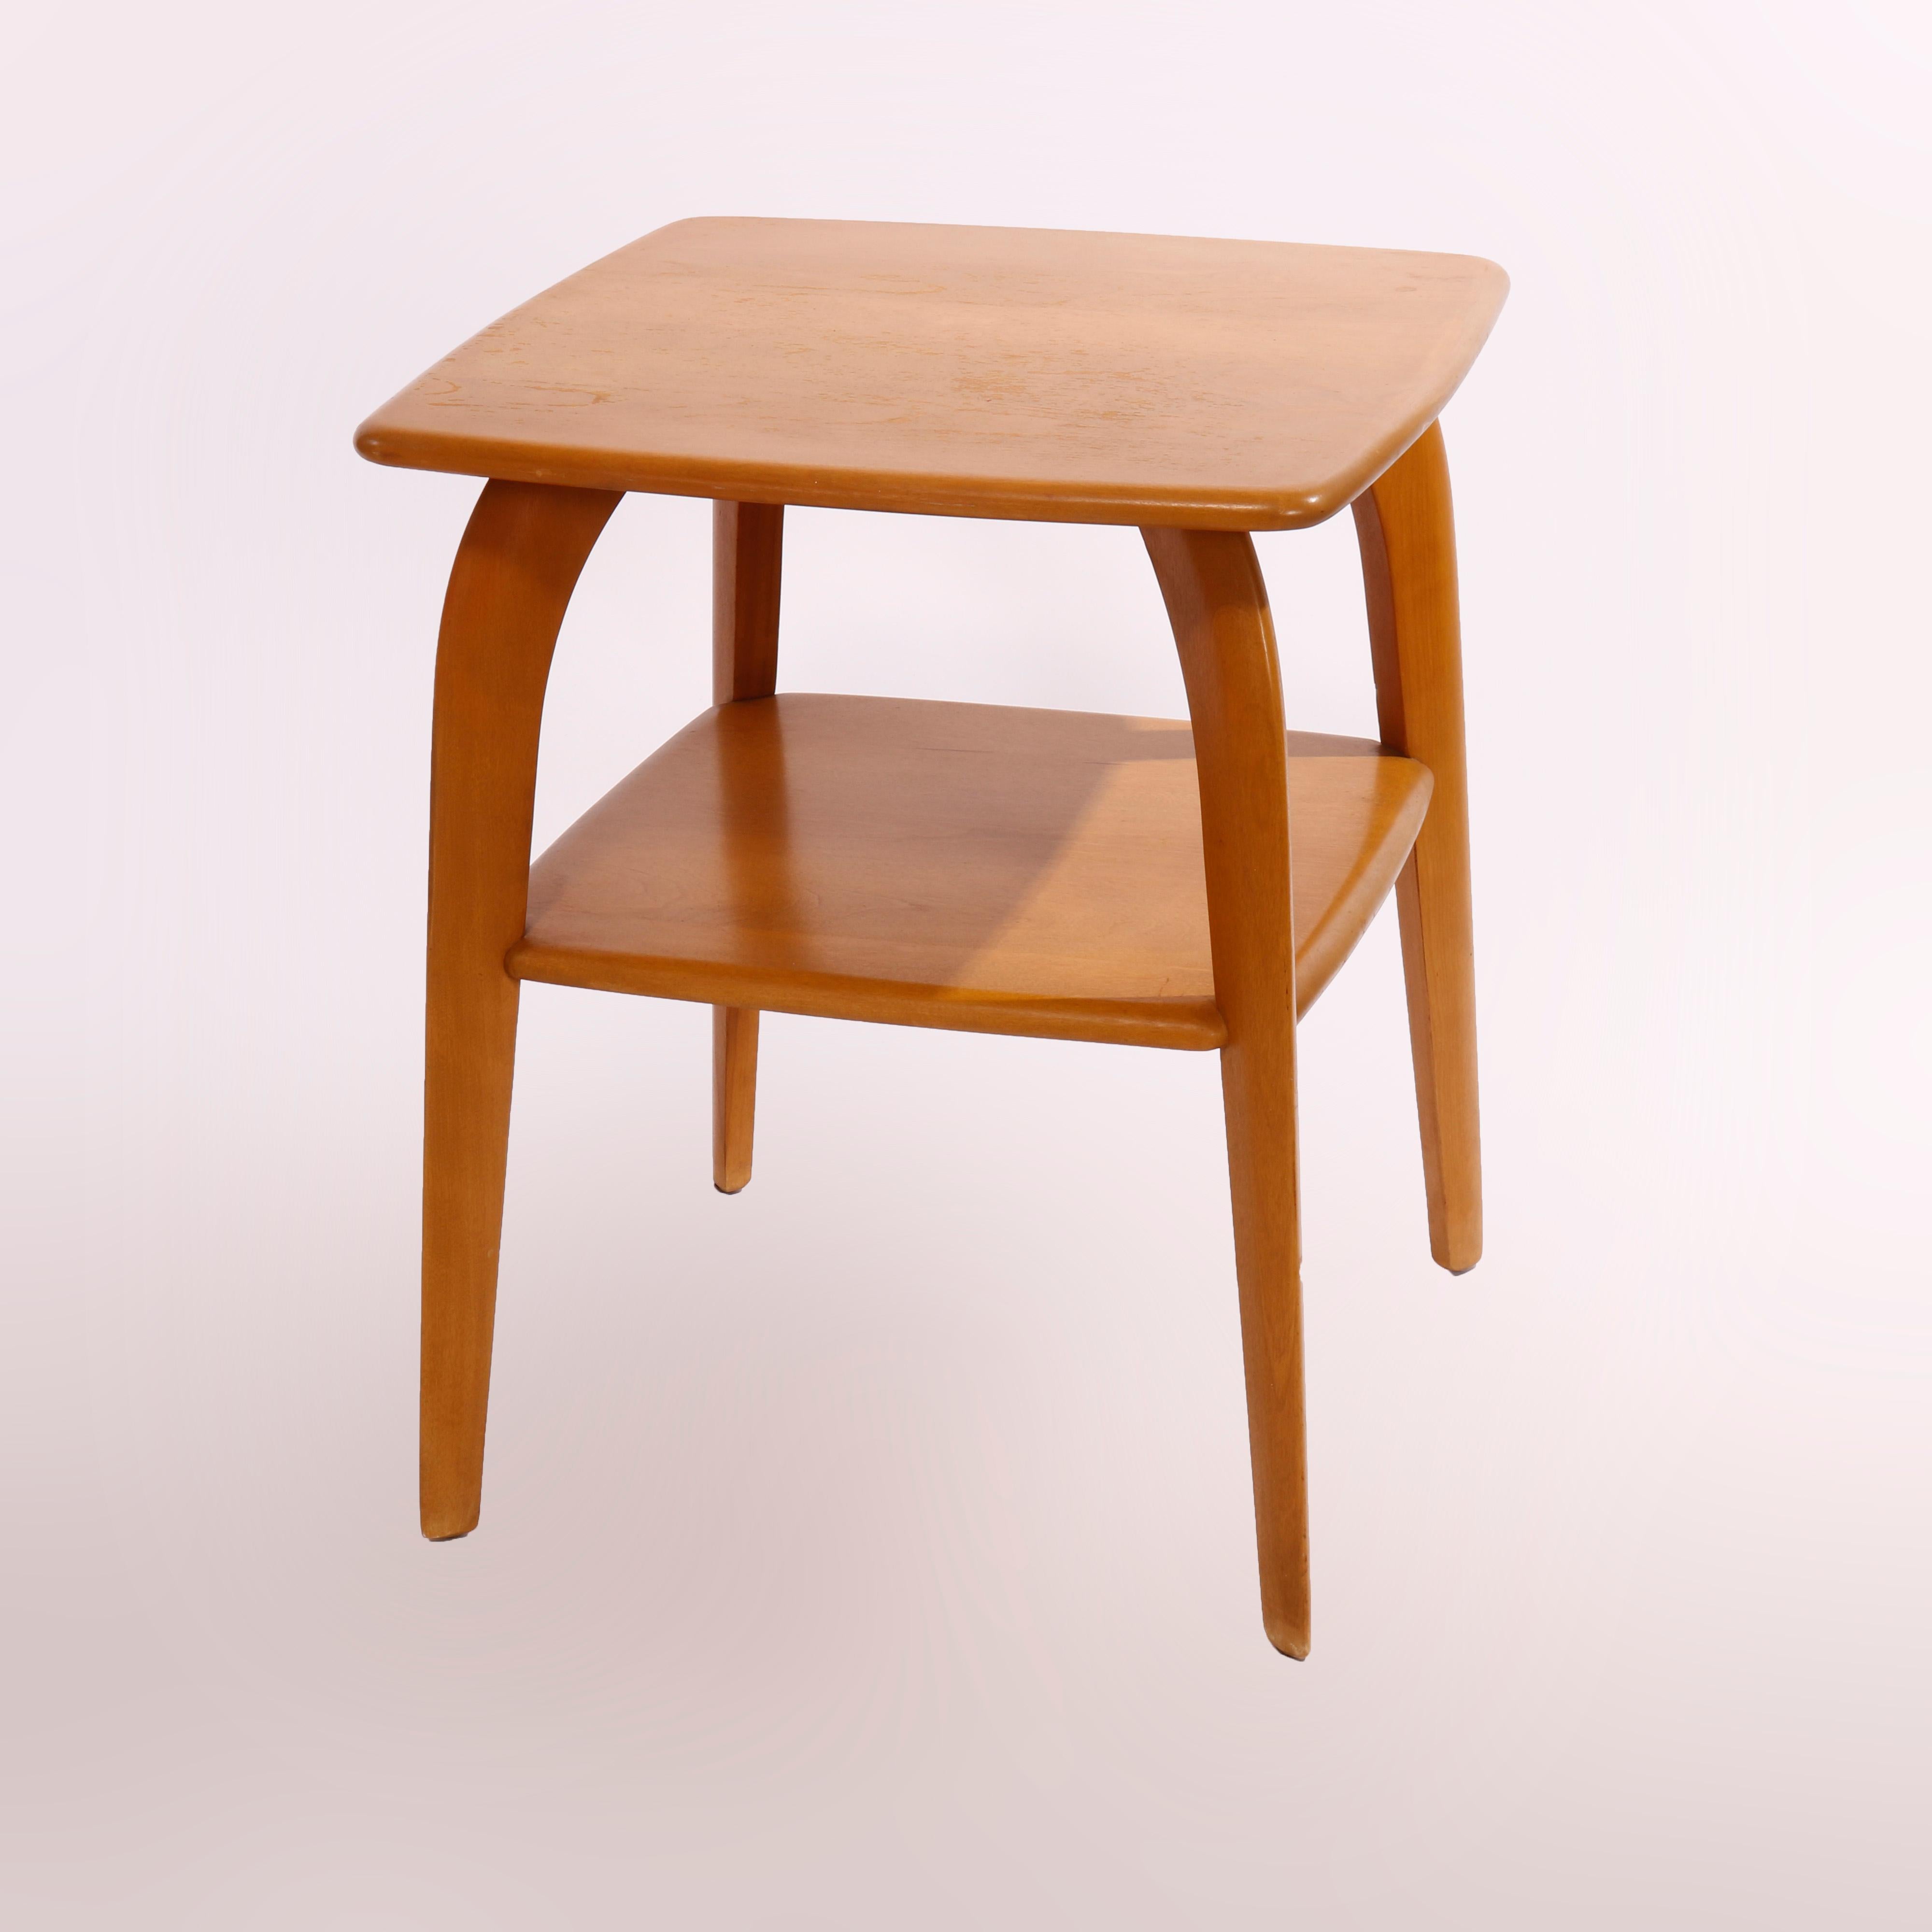 A Mid-Century Modern side table by Heywood Wakefield offers birch construction in Wishbone form having square top over lower shelf and raised on convex legs, maker stamp as photographed, c1950

Measures - 25.25